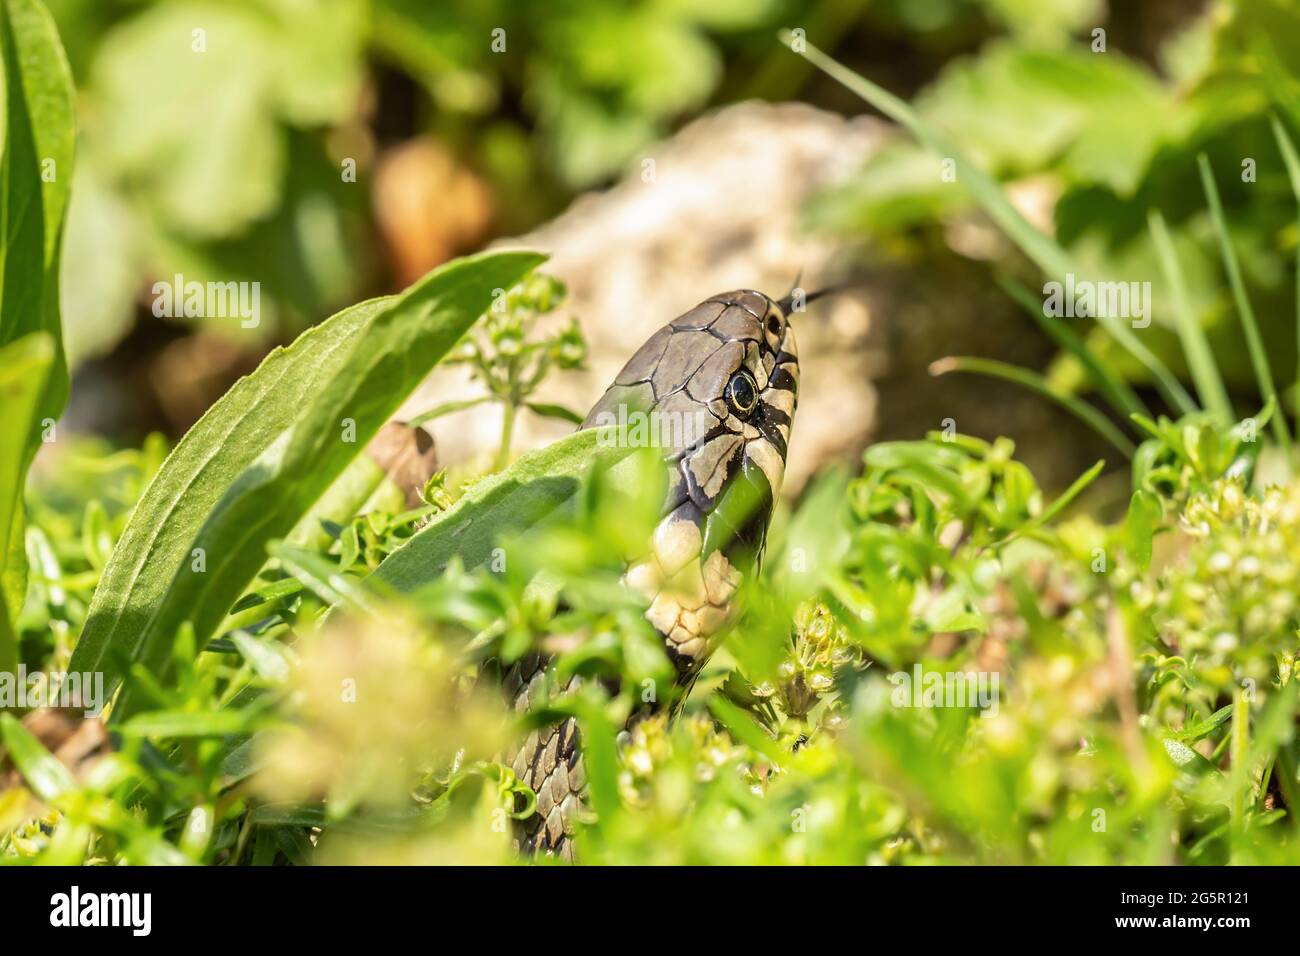 Close-up of a grass snake crawling in a garden Stock Photo